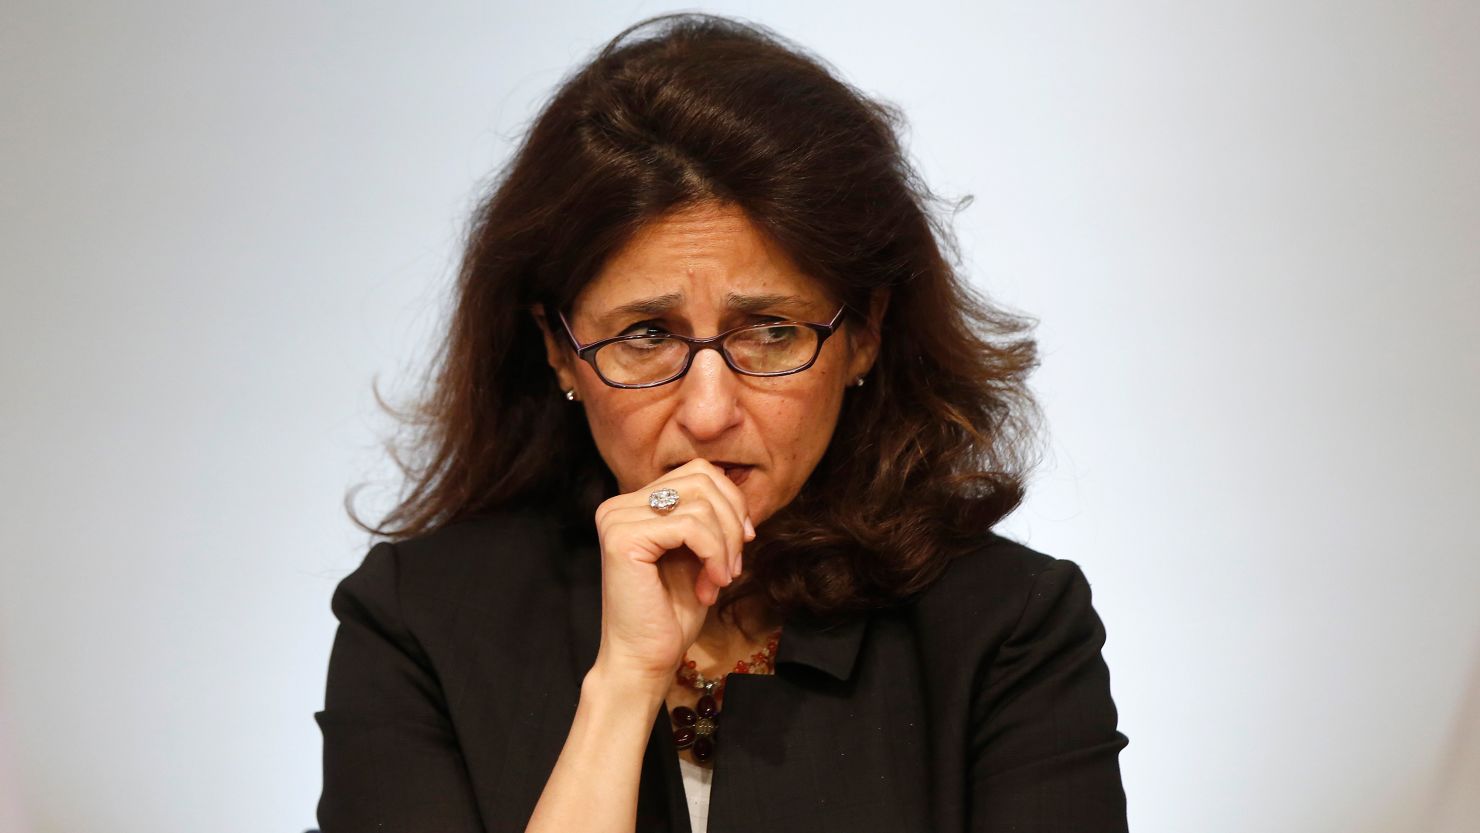 Minouche Shafik during a Bank of England news conference in London, on August 6, 2015.